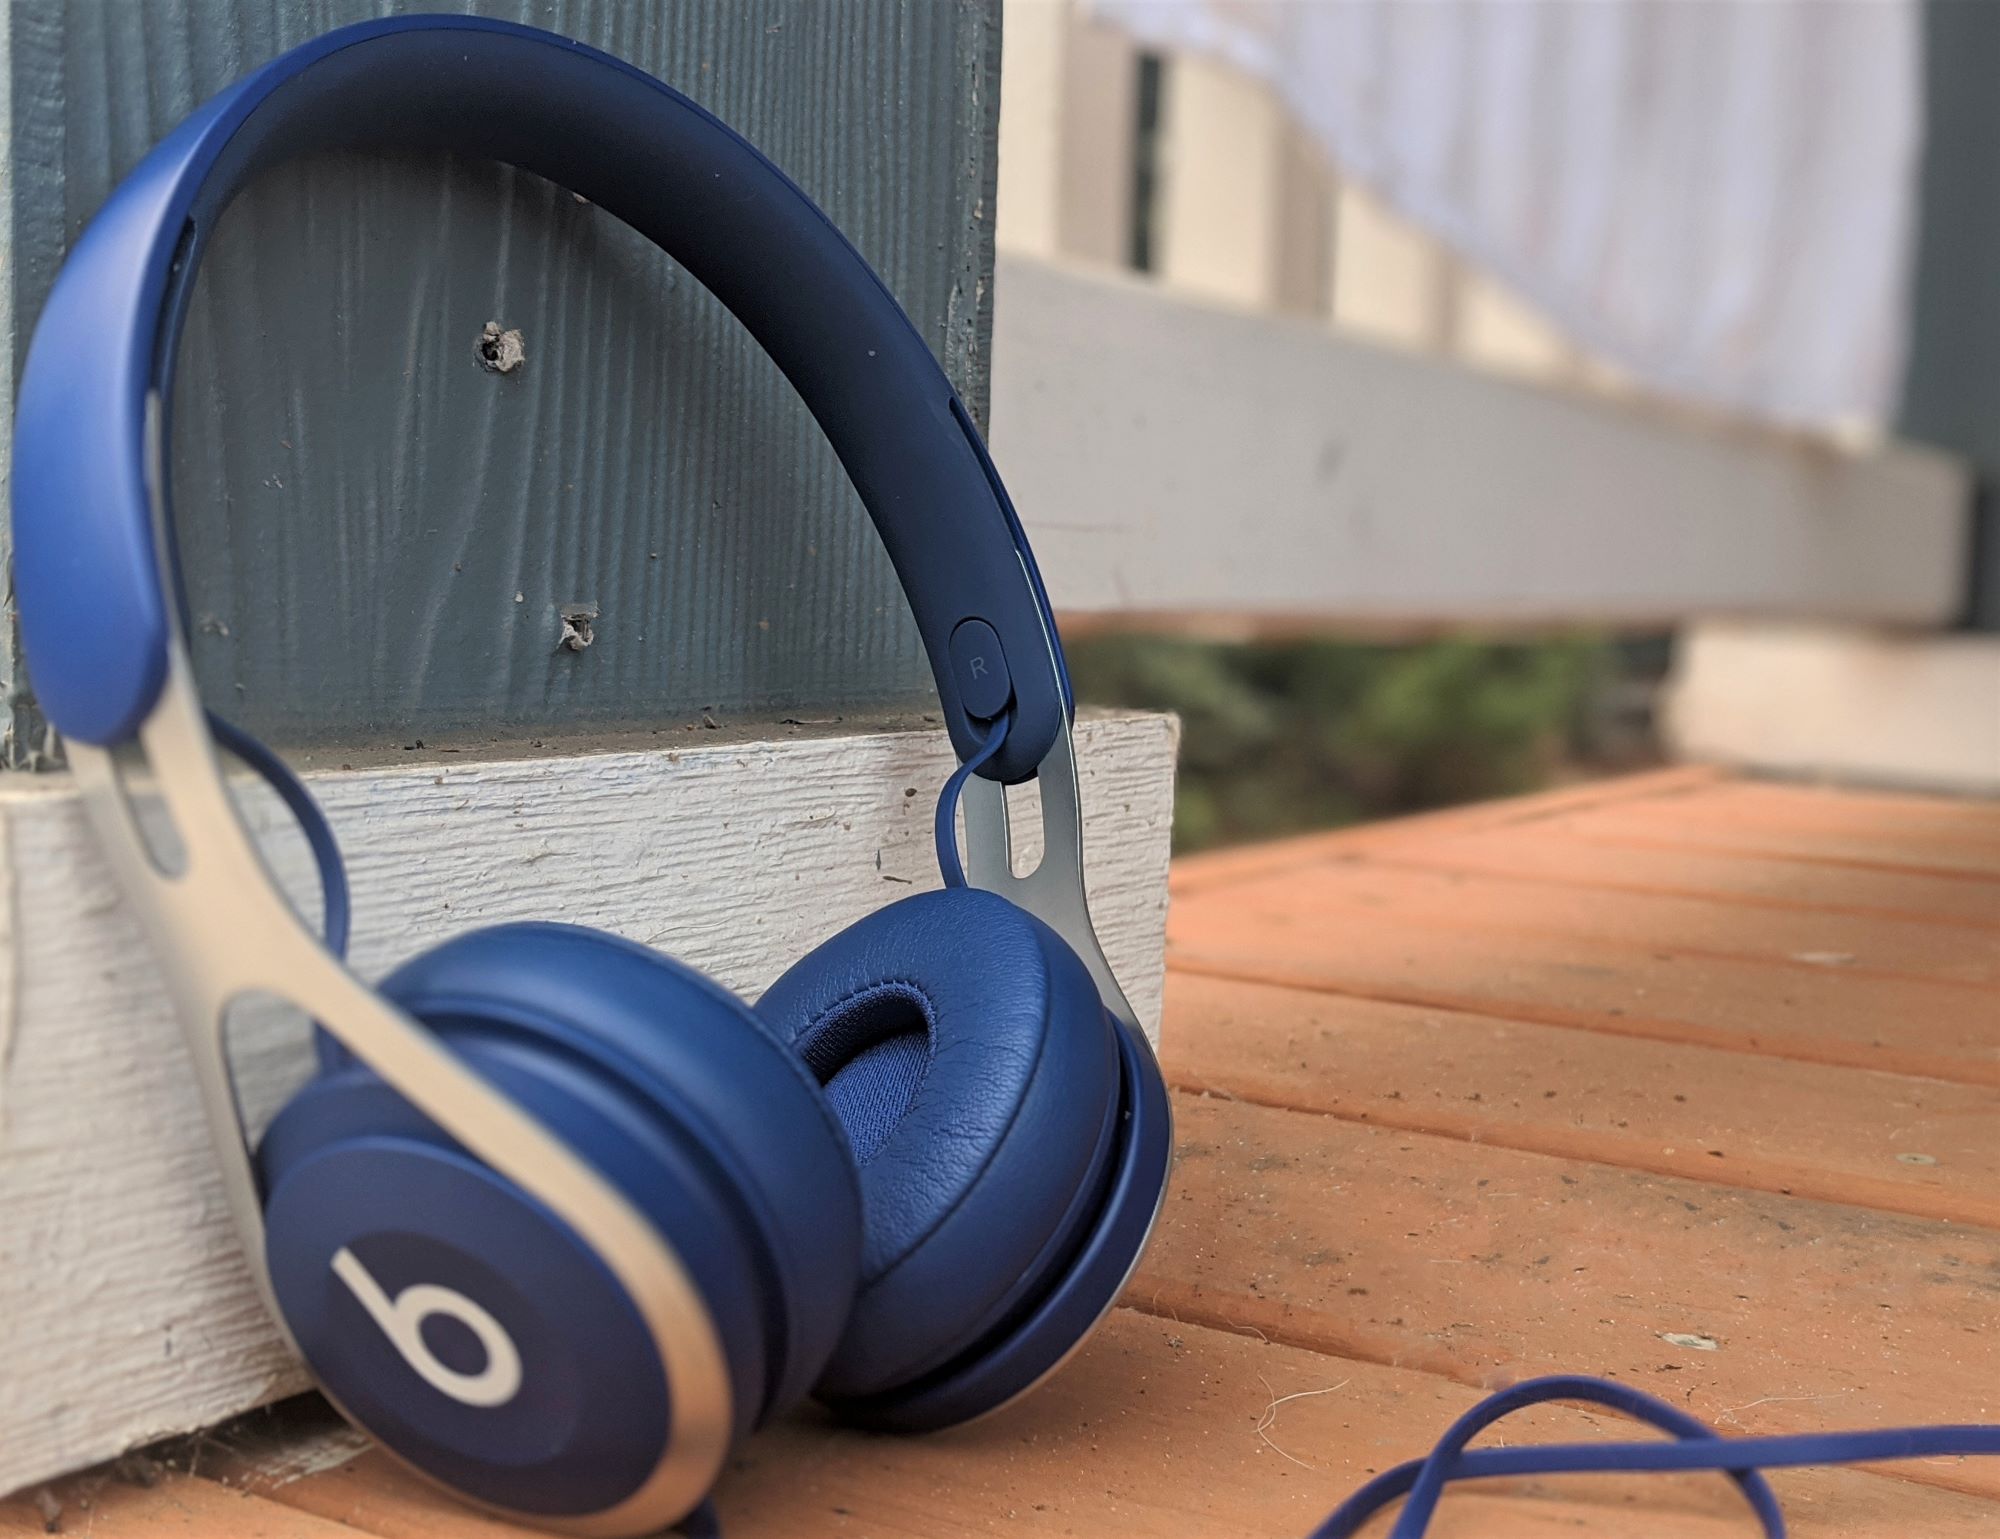 Beats Review: Good Sound Trapped By Limitations | Digital Trends